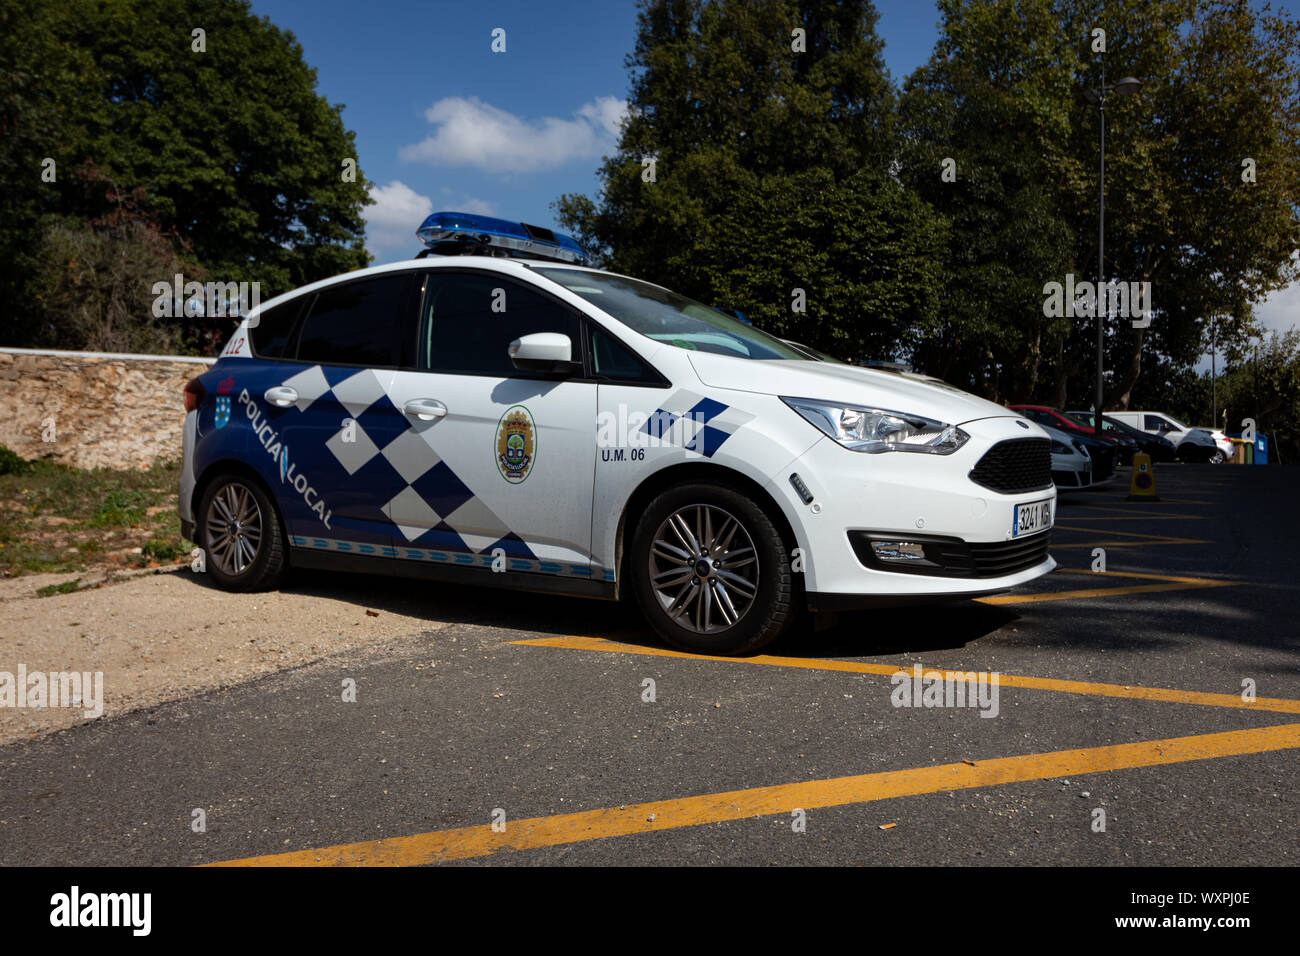 Cambre / Spain - September 16 2019: Local blue and white police car parked illegally in Cambre Spain Stock Photo